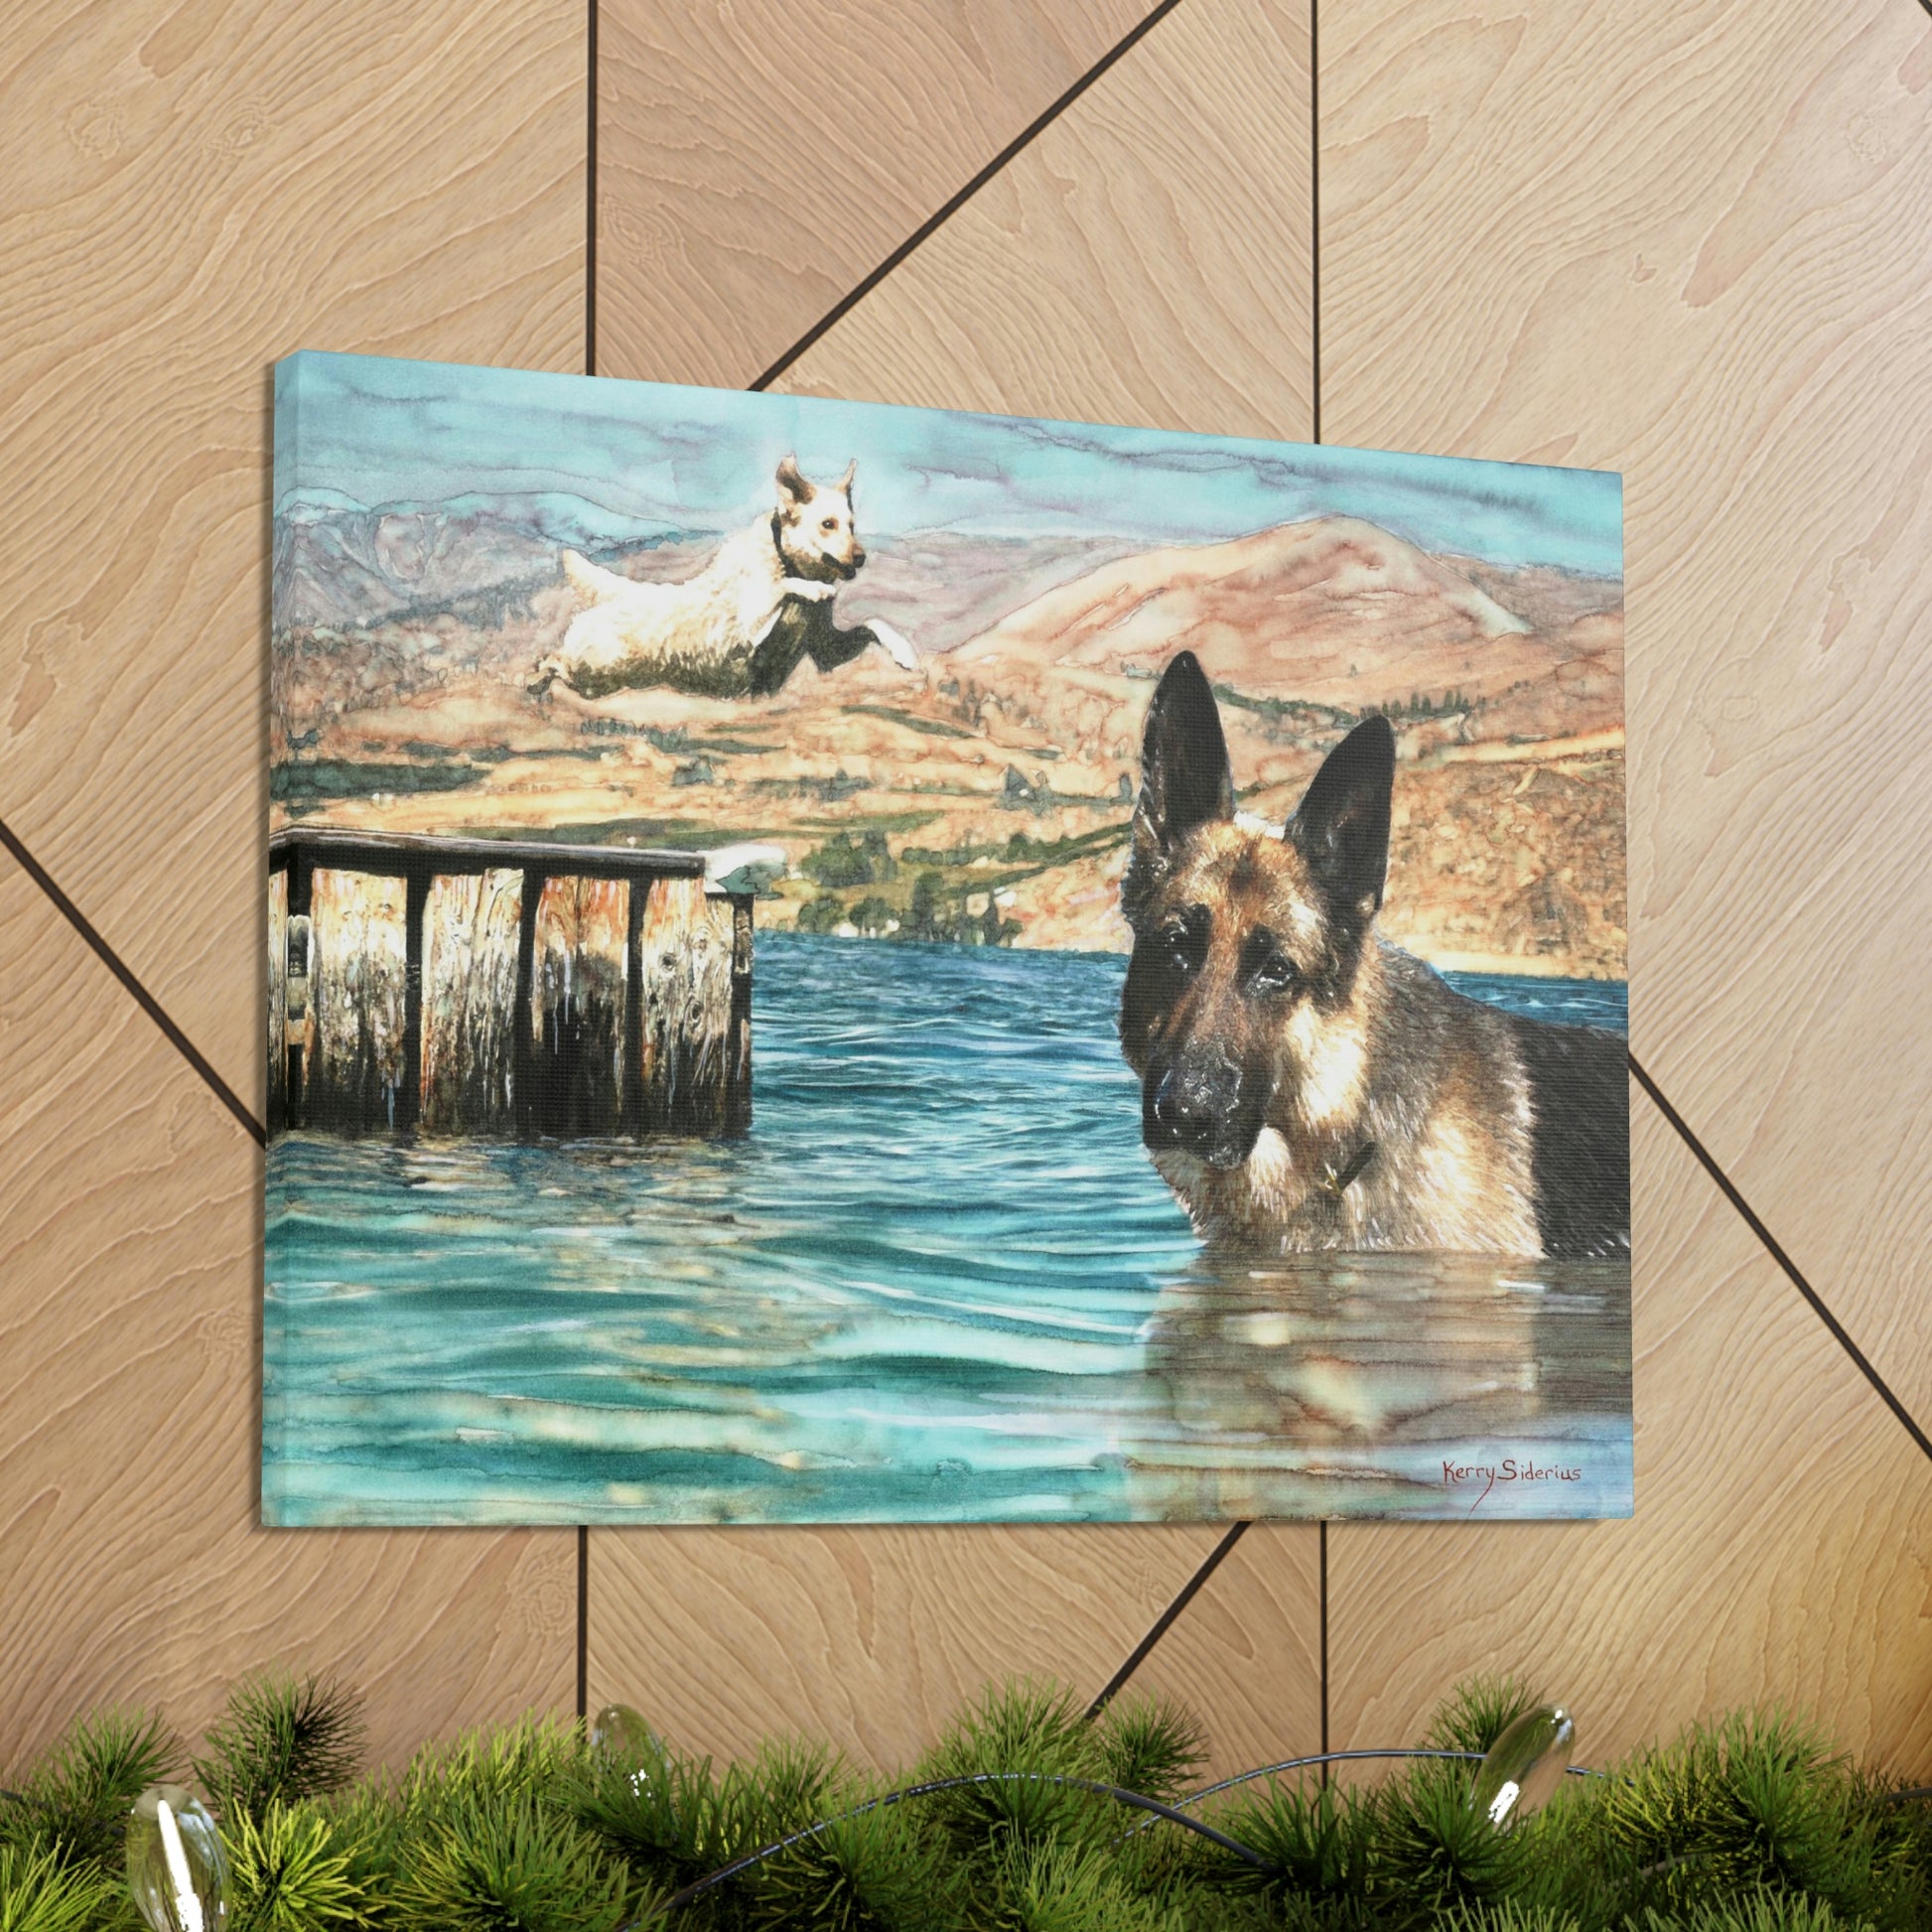 "Chelan Dogs" Canvas Gallery Wrap - Kerry Siderius Art 